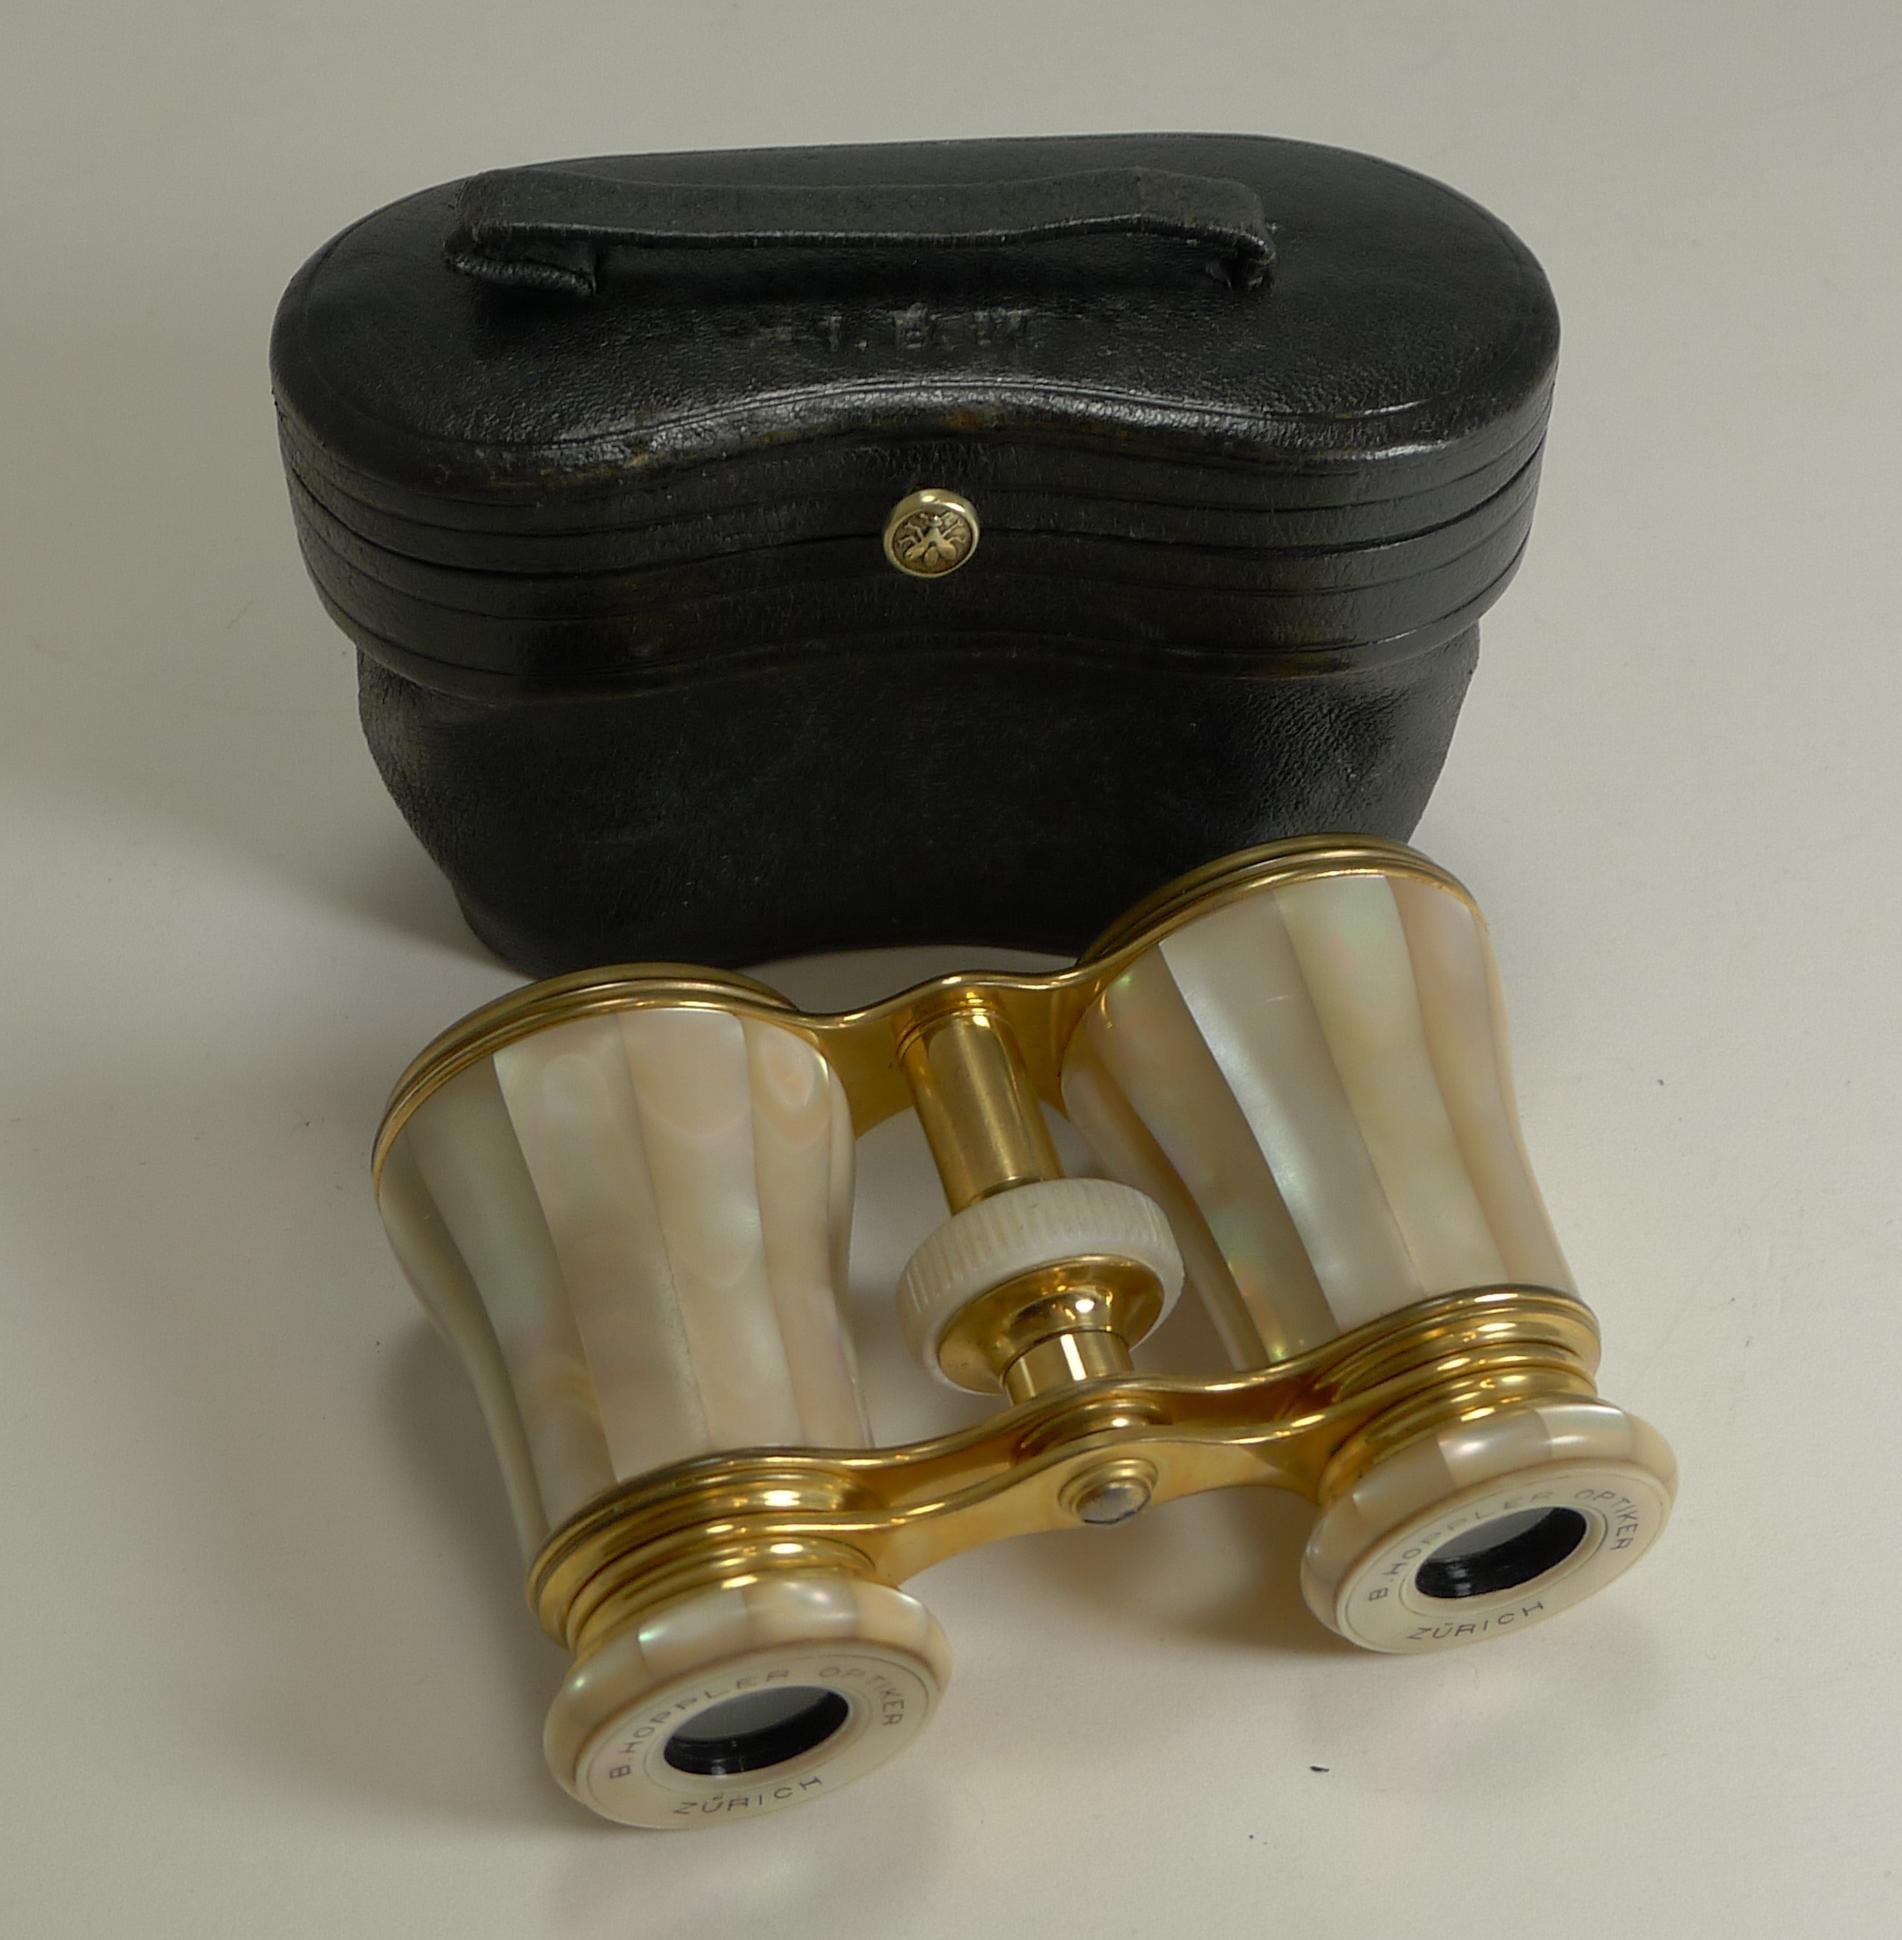 A very fine pair of late 19th century opera glasses made from Mother of Pearl and the original gilded brass; made by the creme de la creme of makers, LeMaire of Paris.

The makers mark (the Napoleonic Bee) is engraved on the underside of frame and